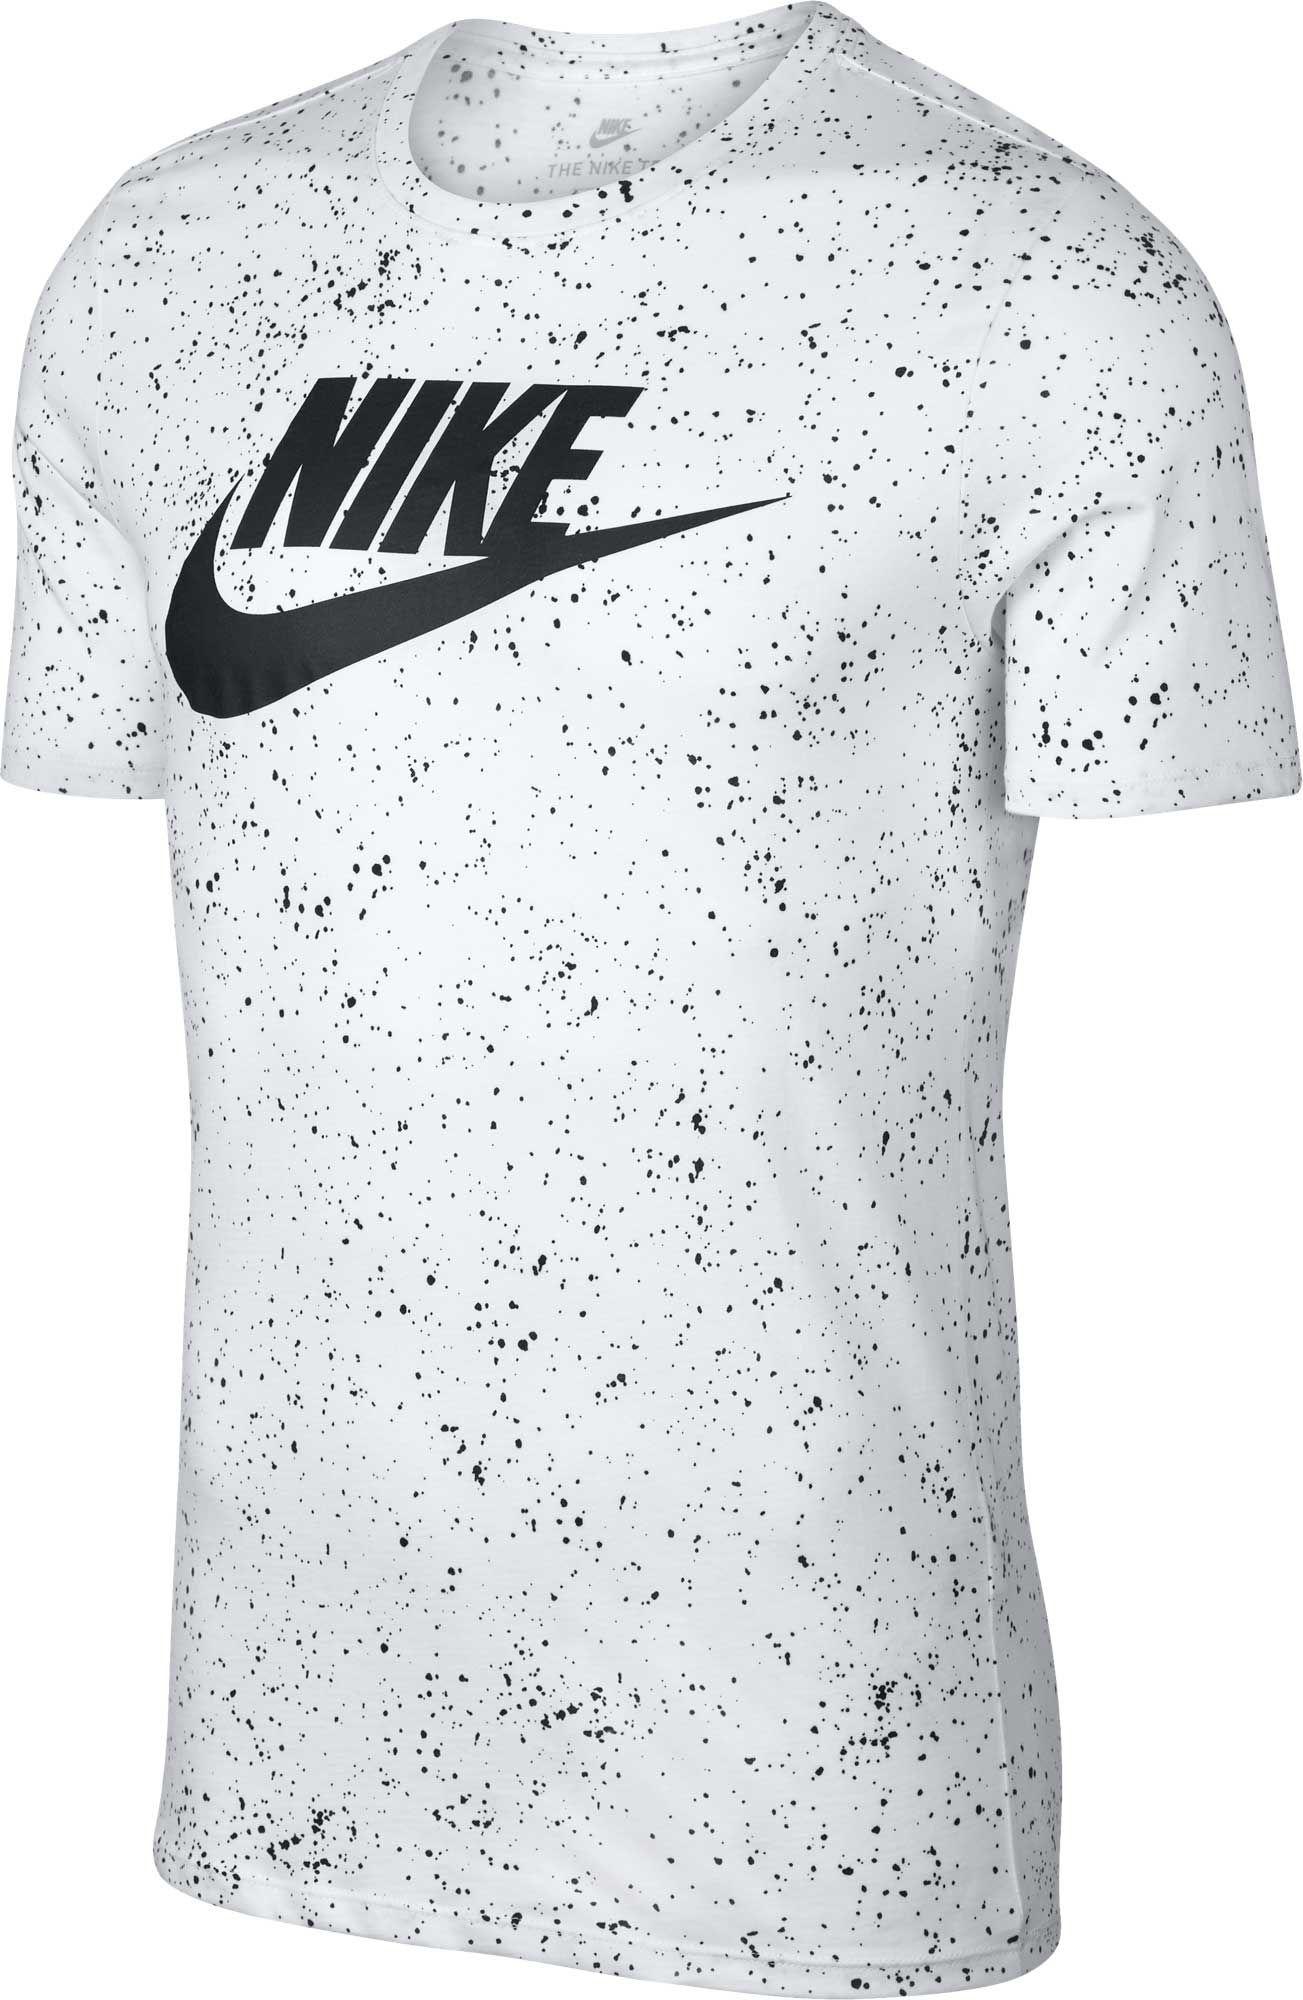 nike speckled t shirt coupon code for 9e737 f2e8a